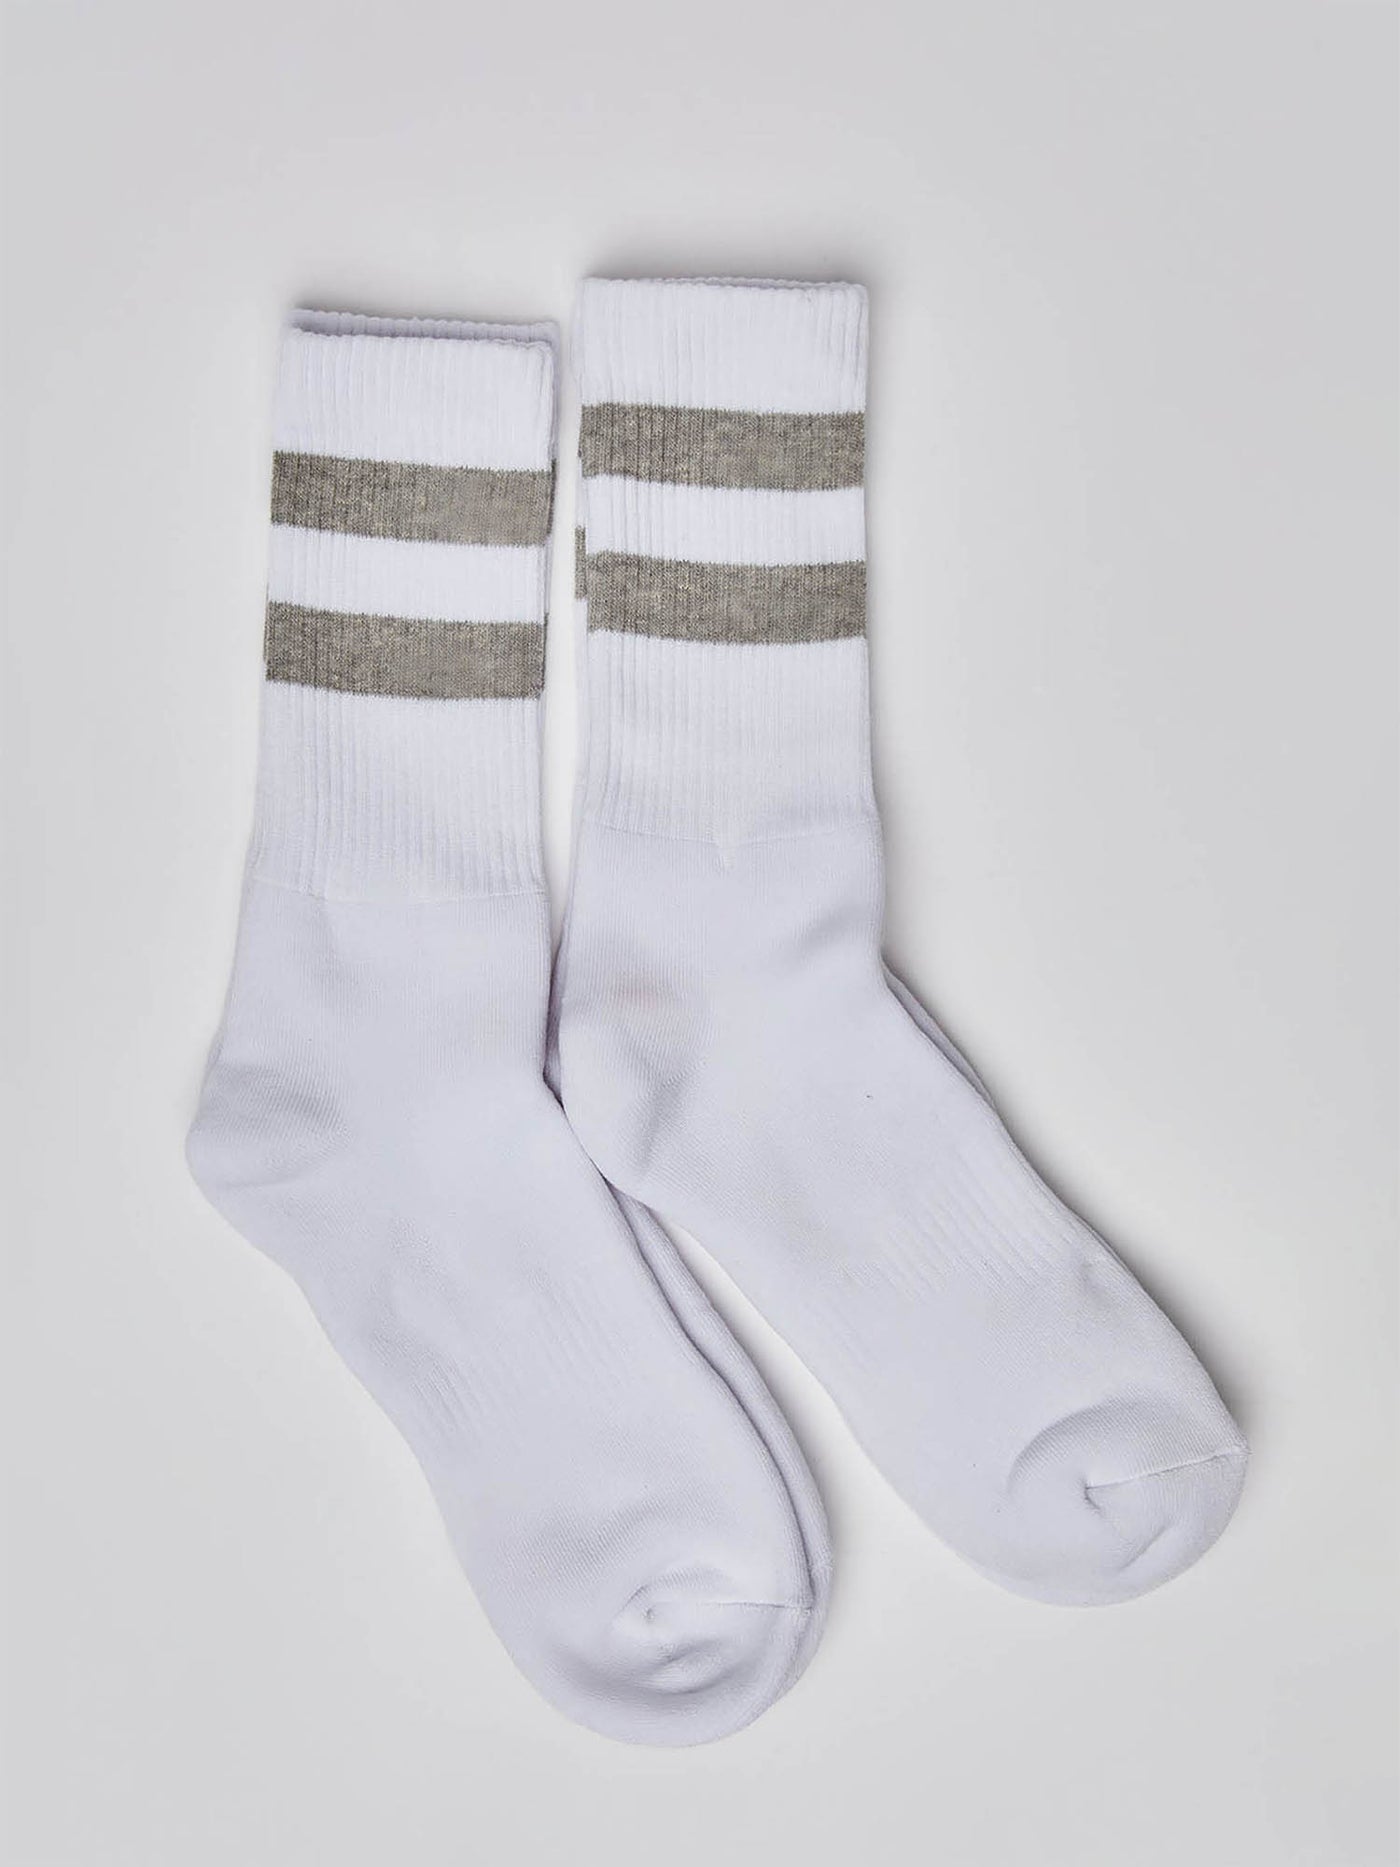 2 Pairs of Socks - Solid - Long